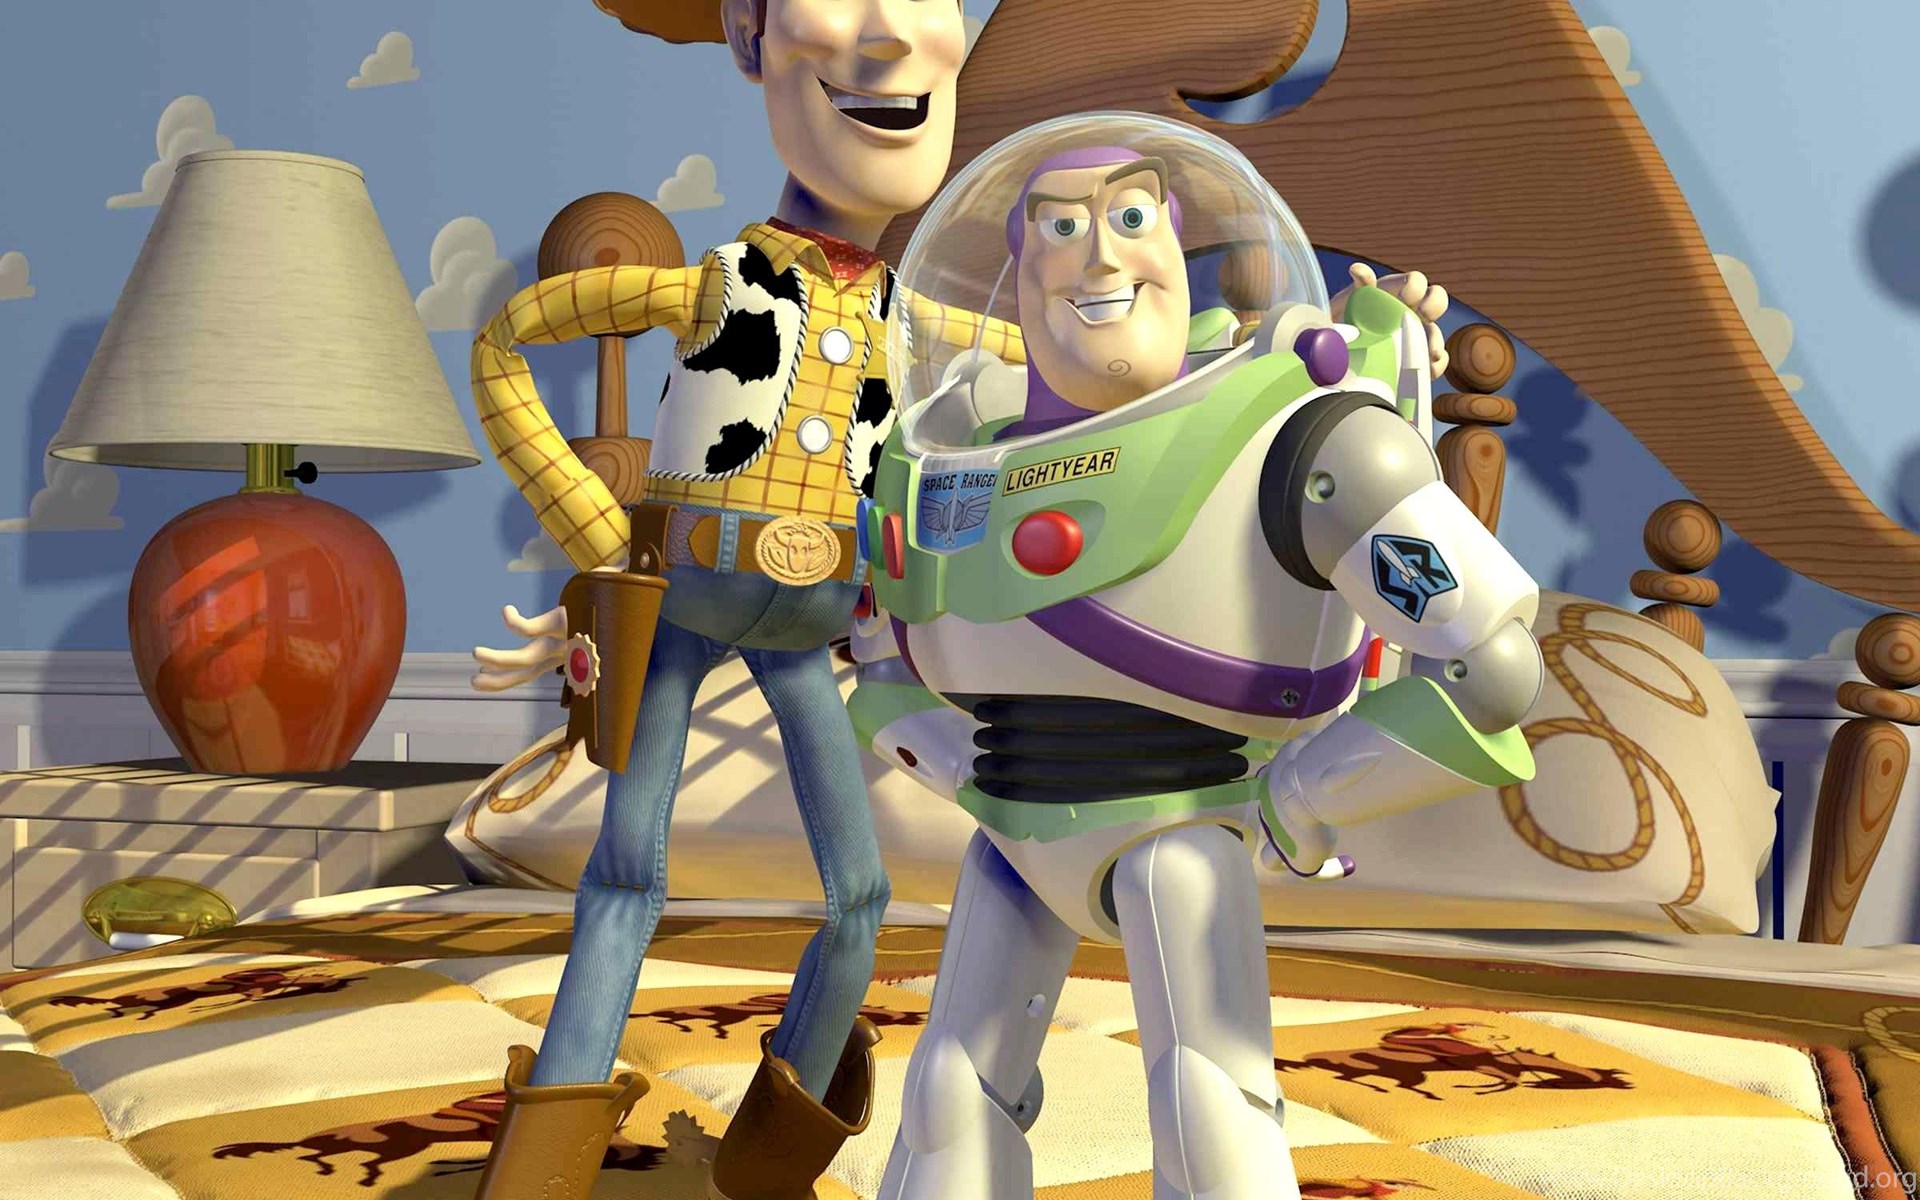 Download Toy Story 3 Woody And Buzz Wallpapers Desktop Hd Free Download Wid...